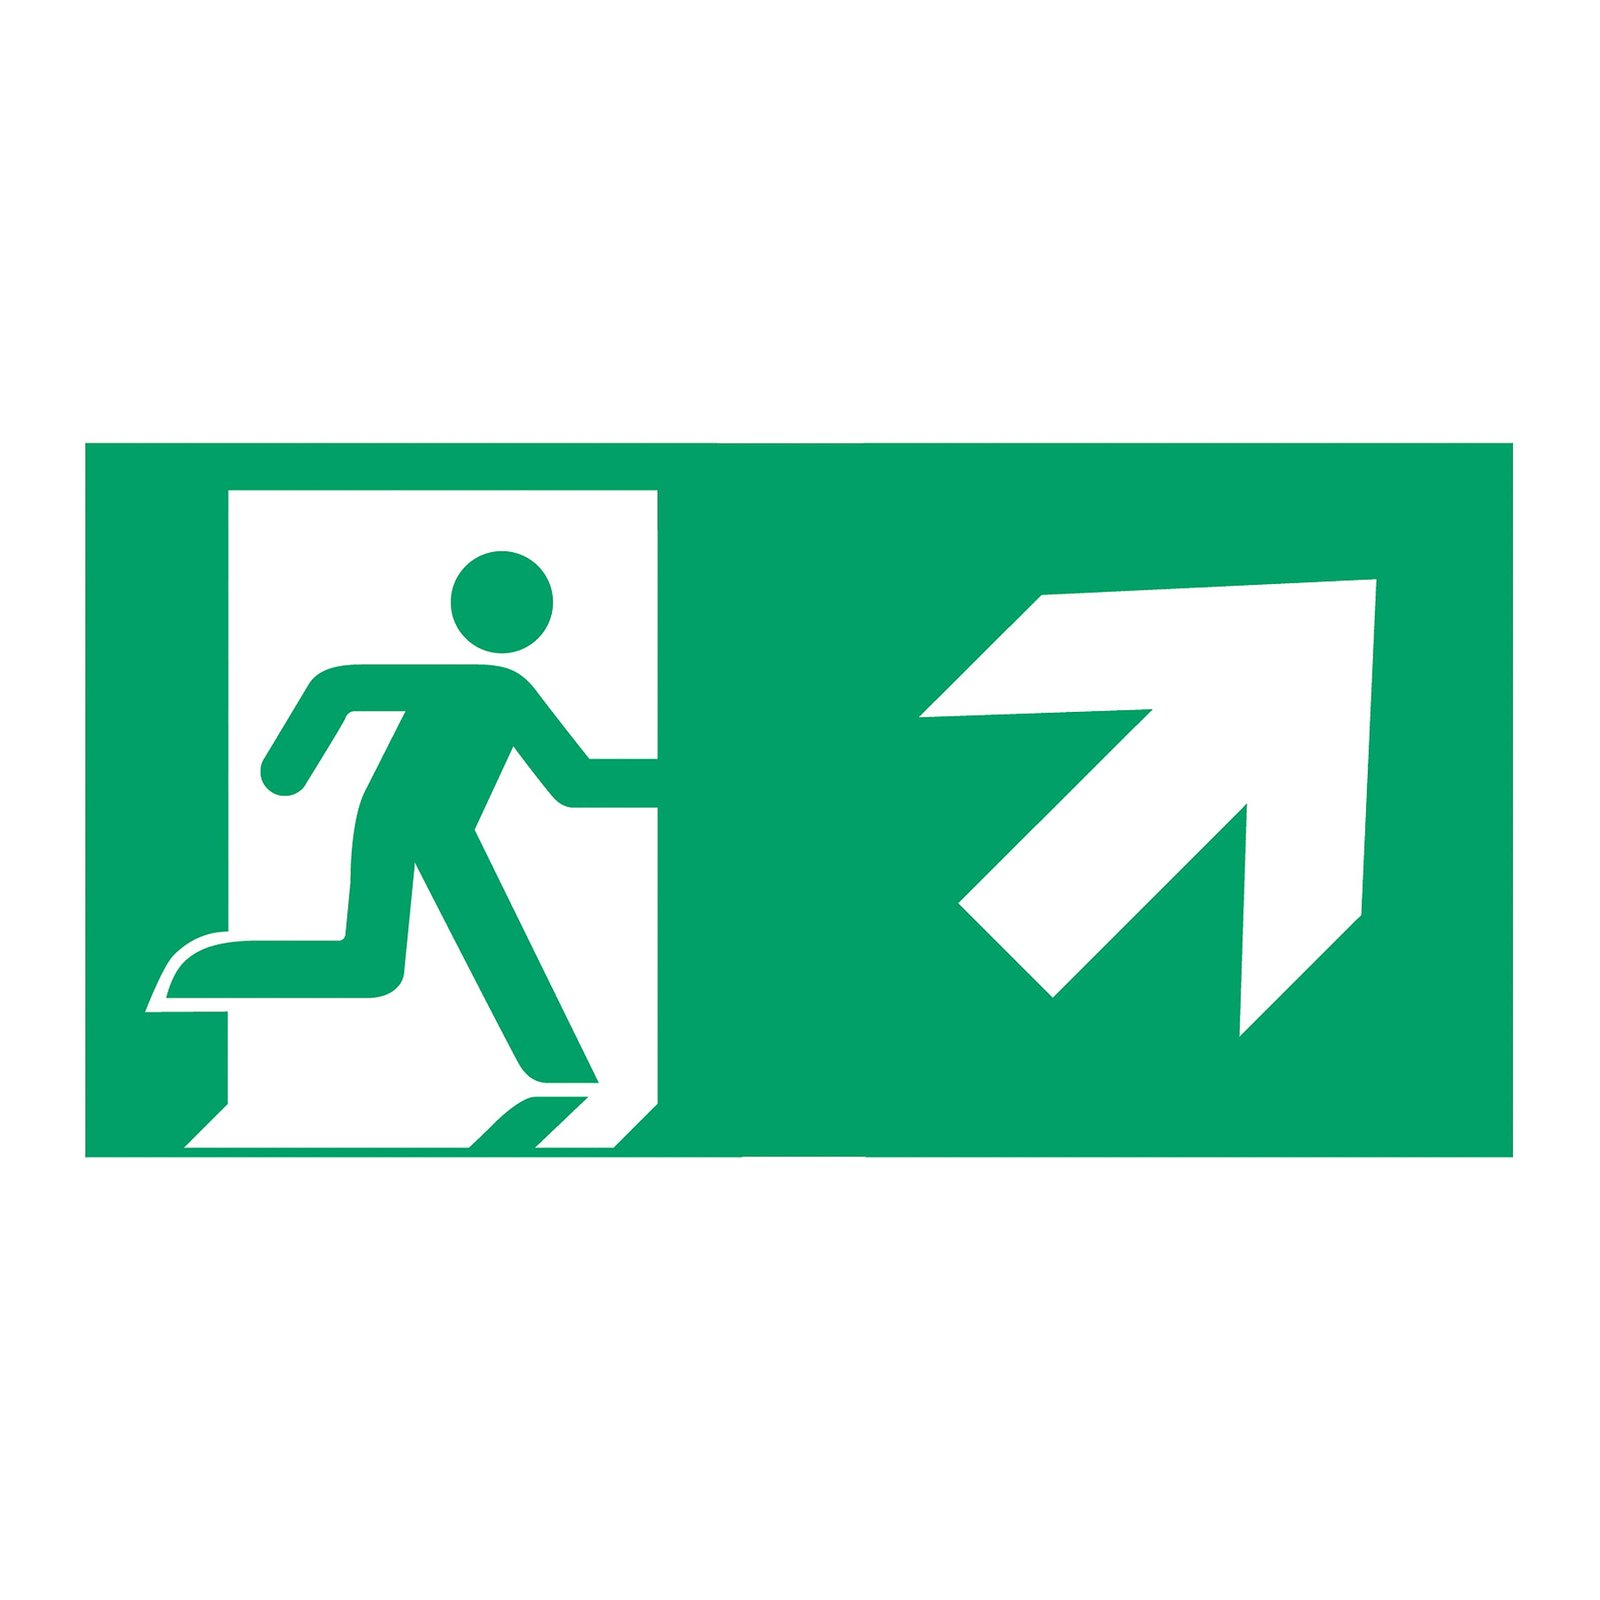 Type G escape route sign for L-LUX Standard Eco